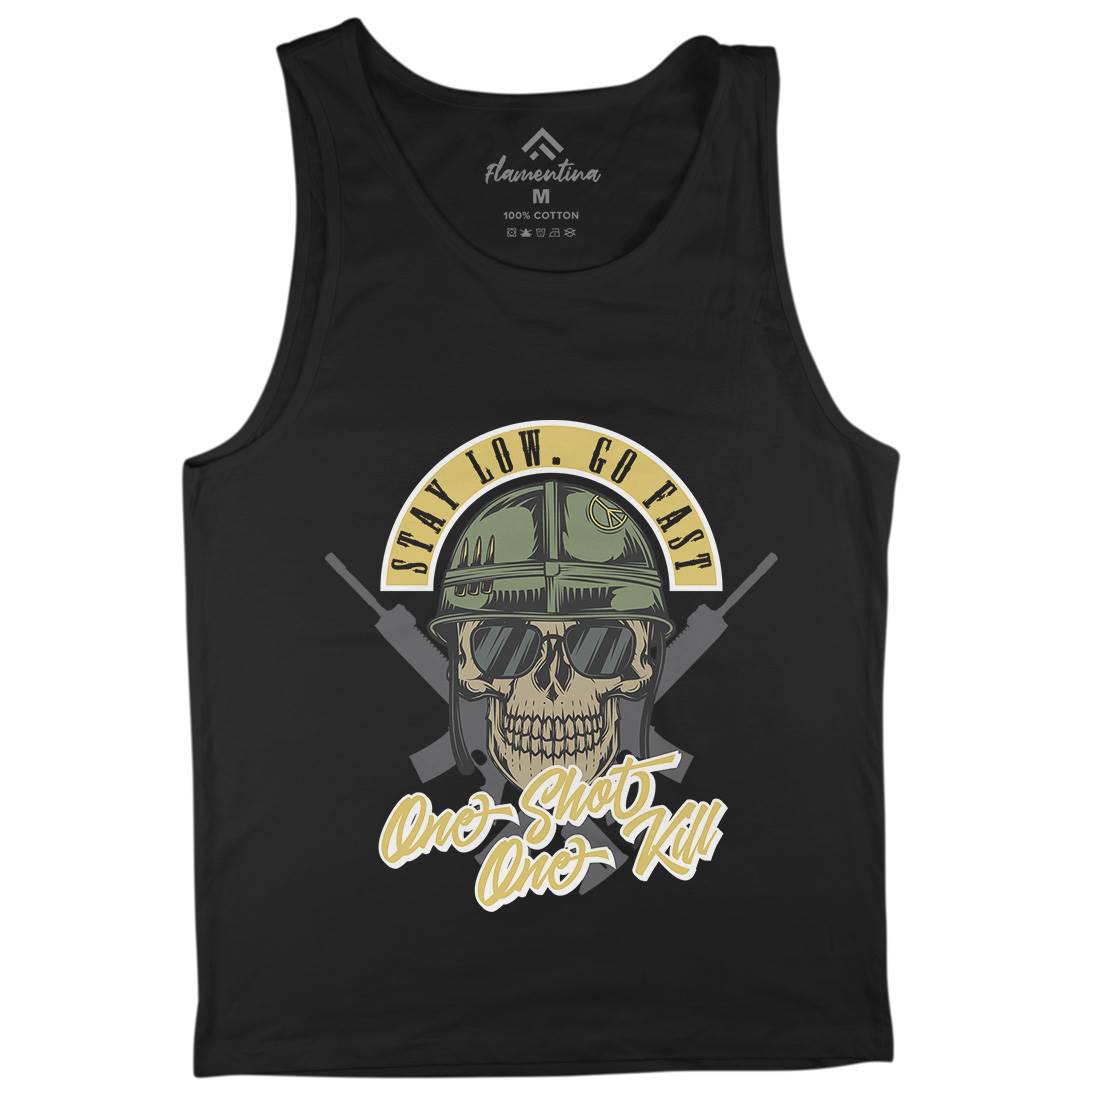 One Shoot Mens Tank Top Vest Army C885